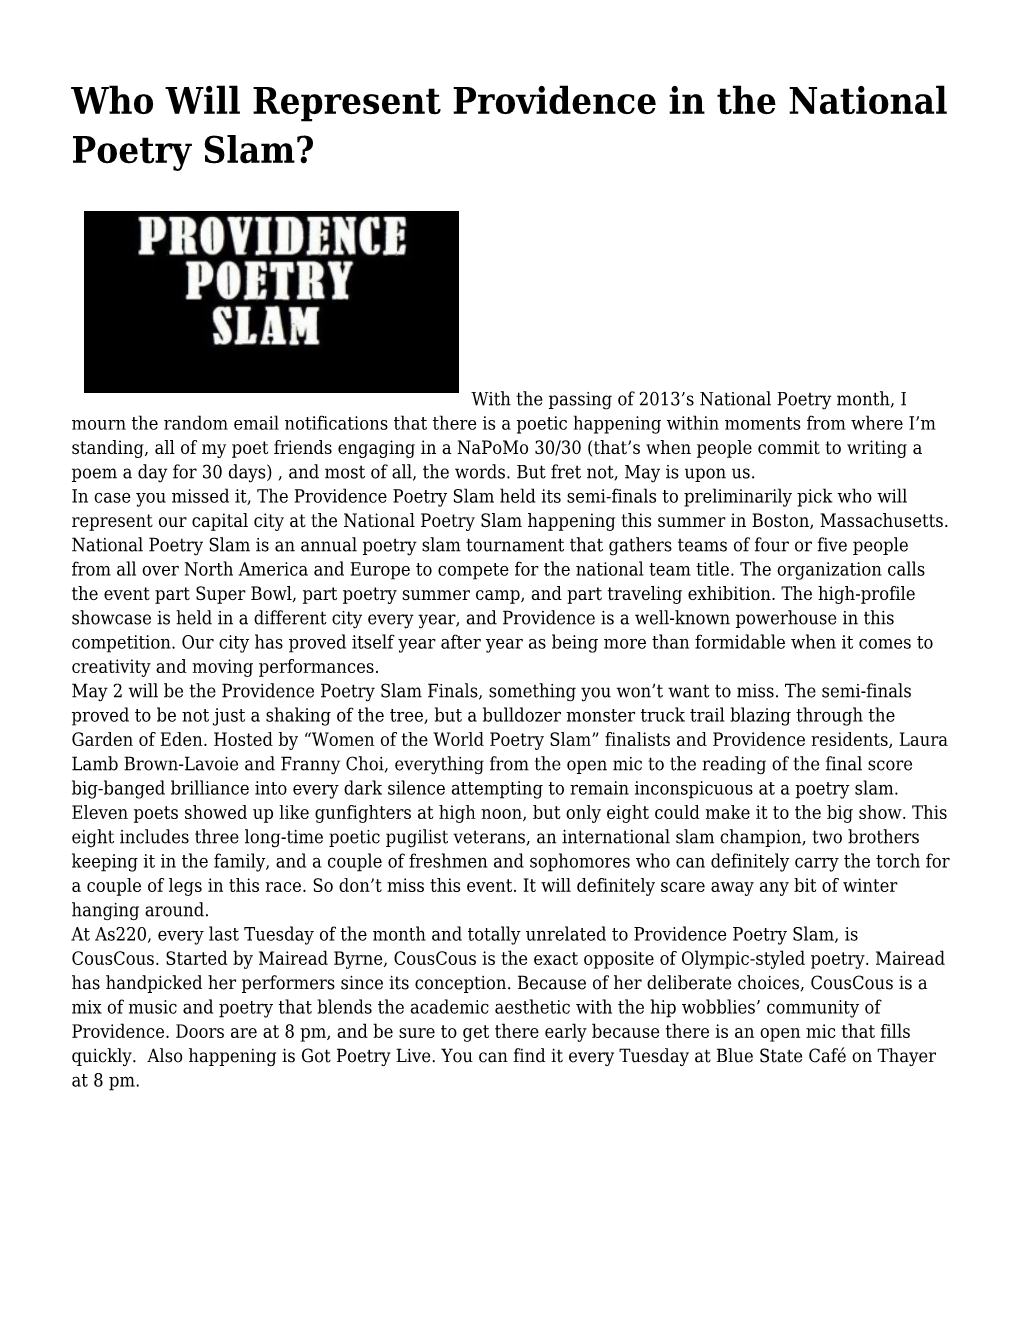 Who Will Represent Providence in the National Poetry Slam?